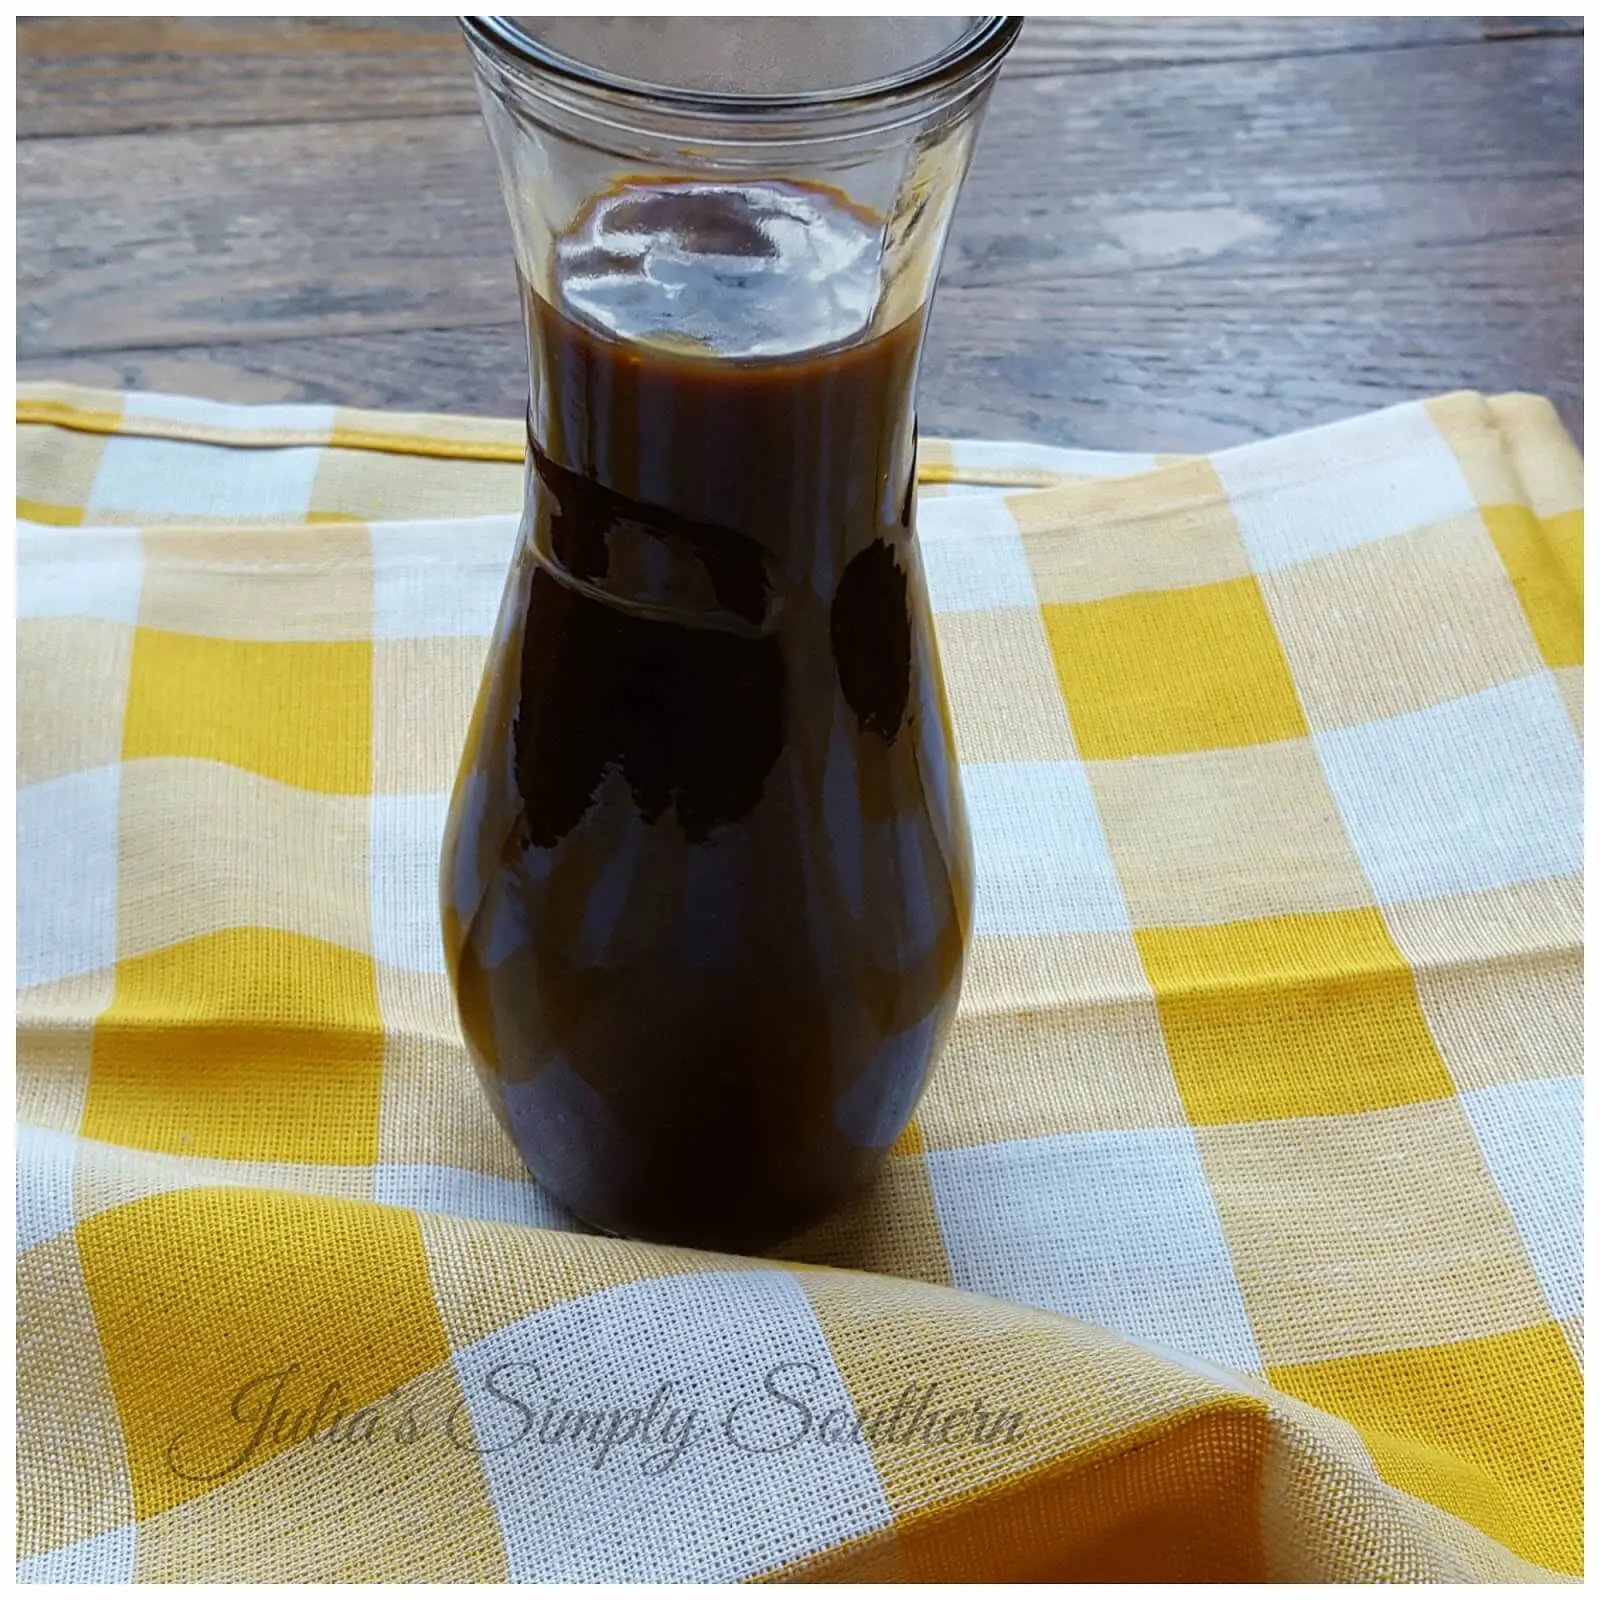 Easy homemade barbecue sauce